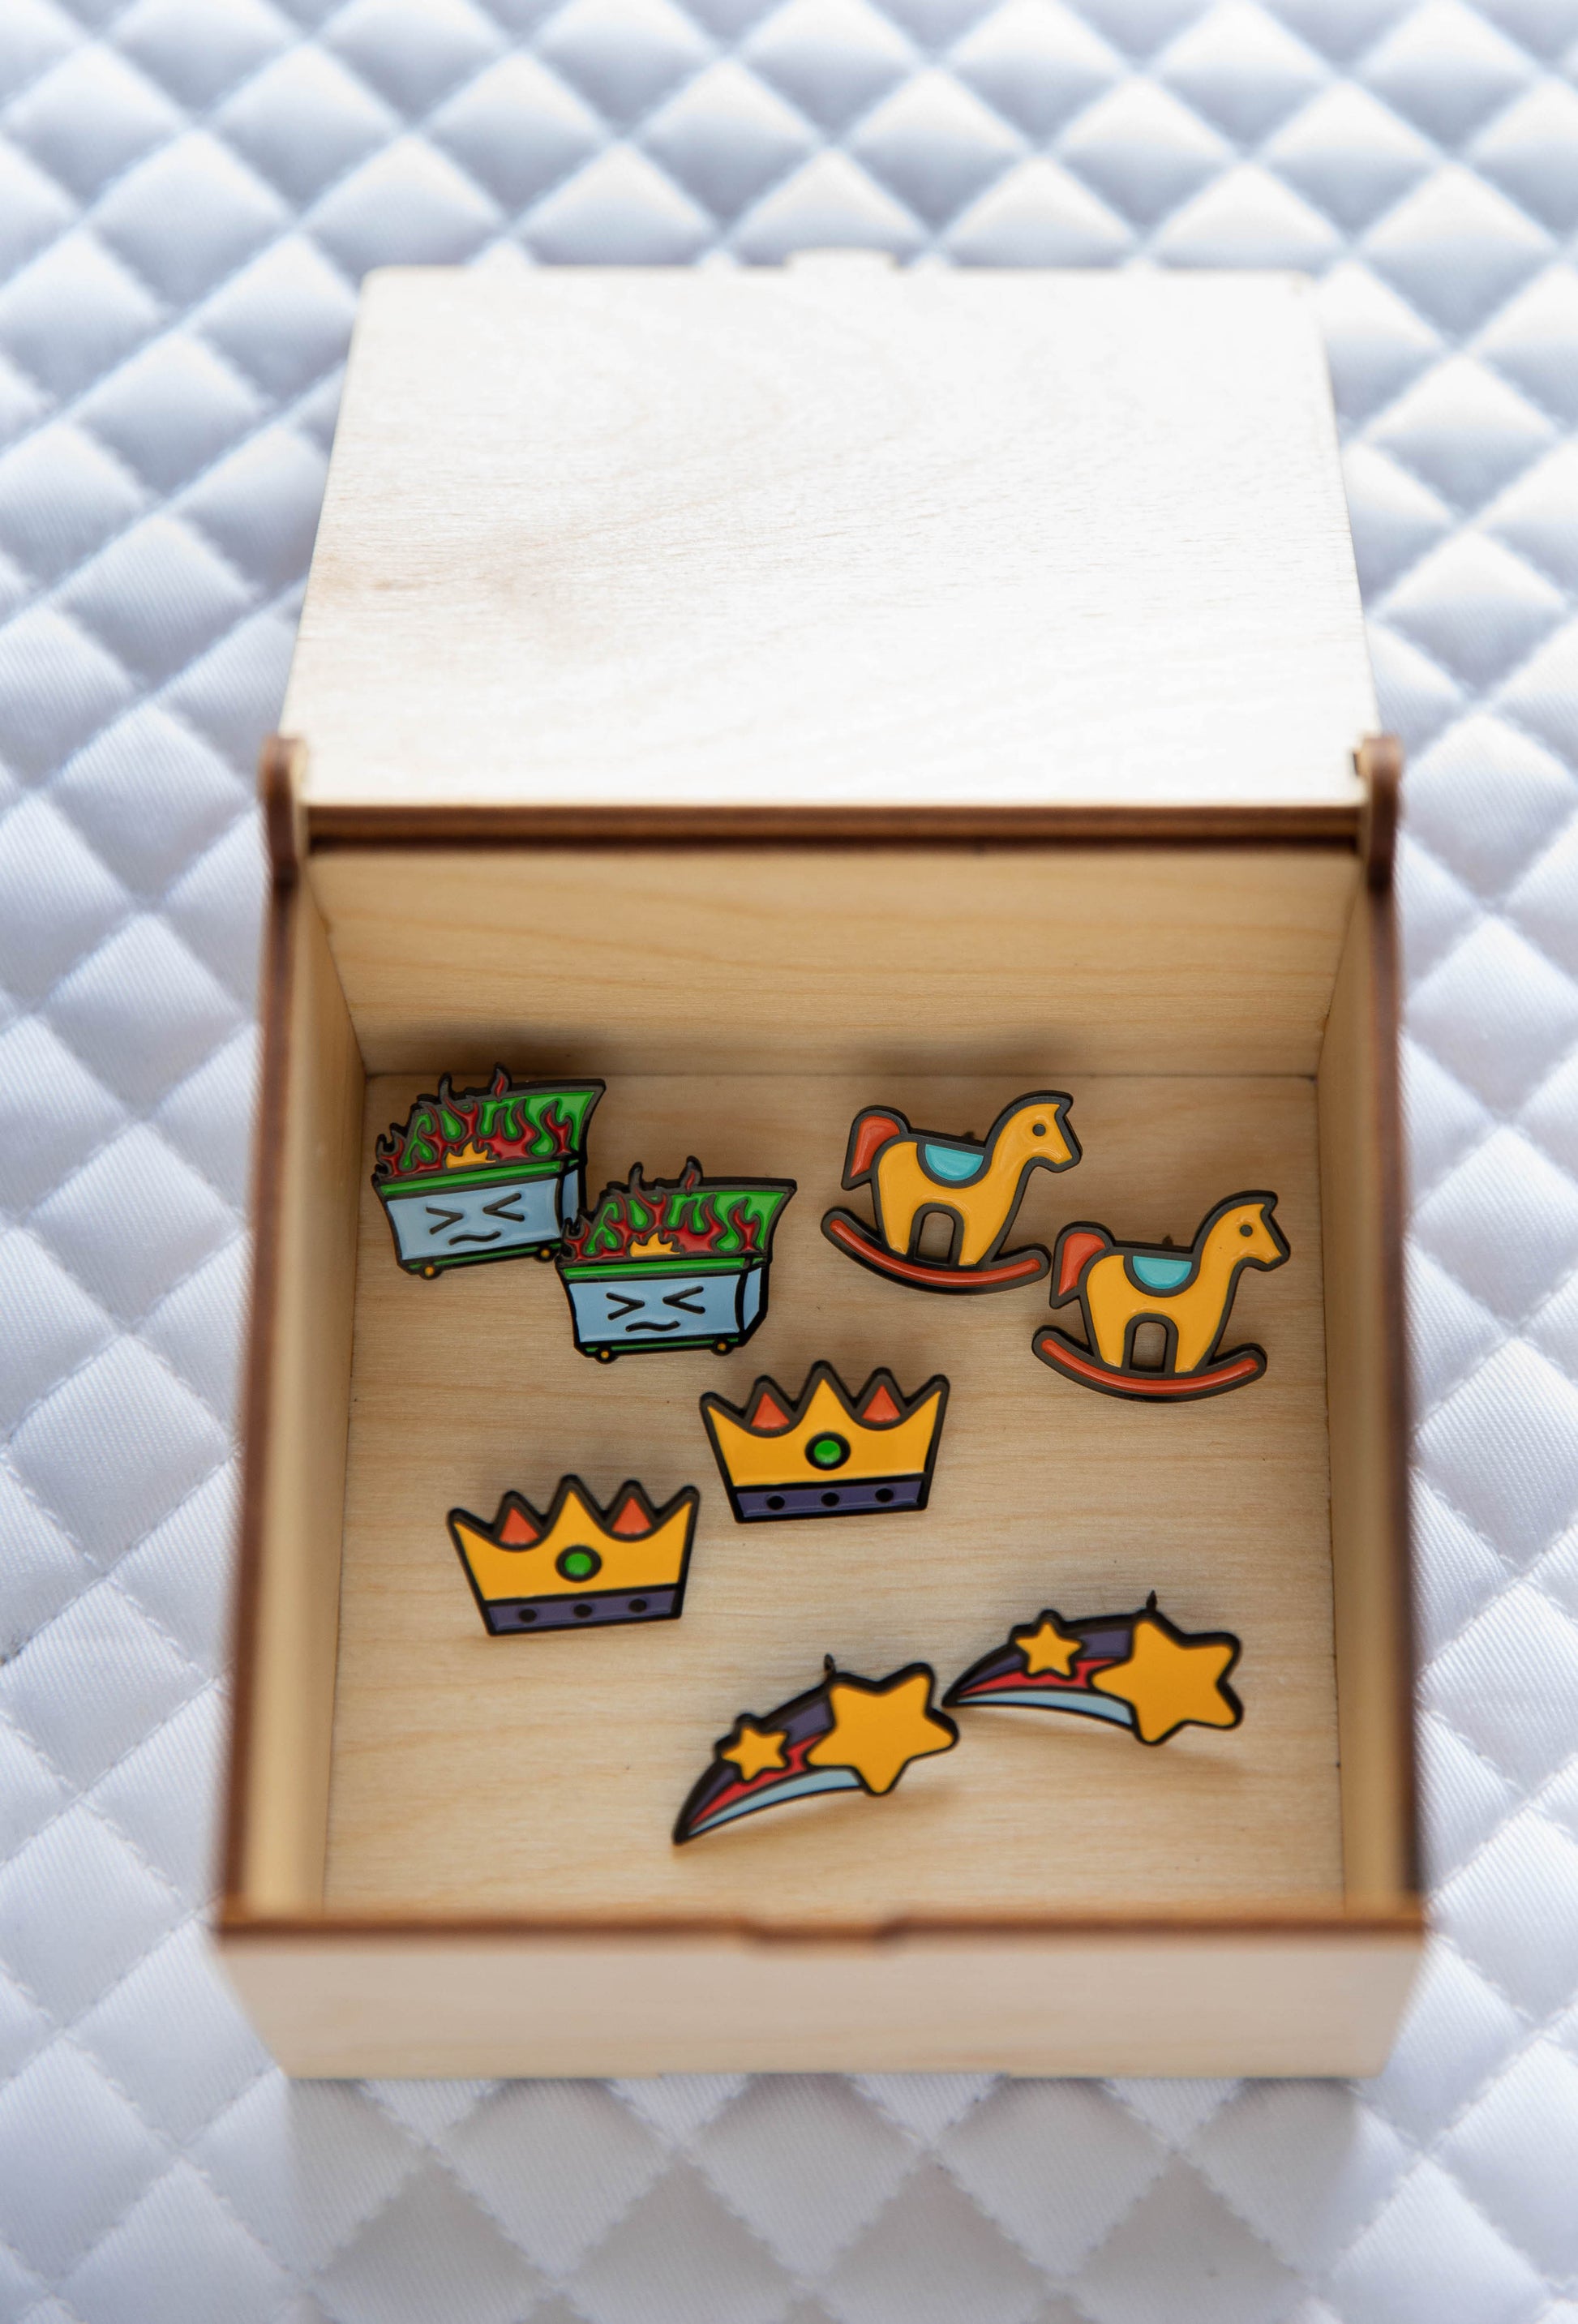 Pinsnickety "Tack" Trunk open with four pairs of pins inside: Shooting Star, Crown, Dumpster fire, and Rocking Horse